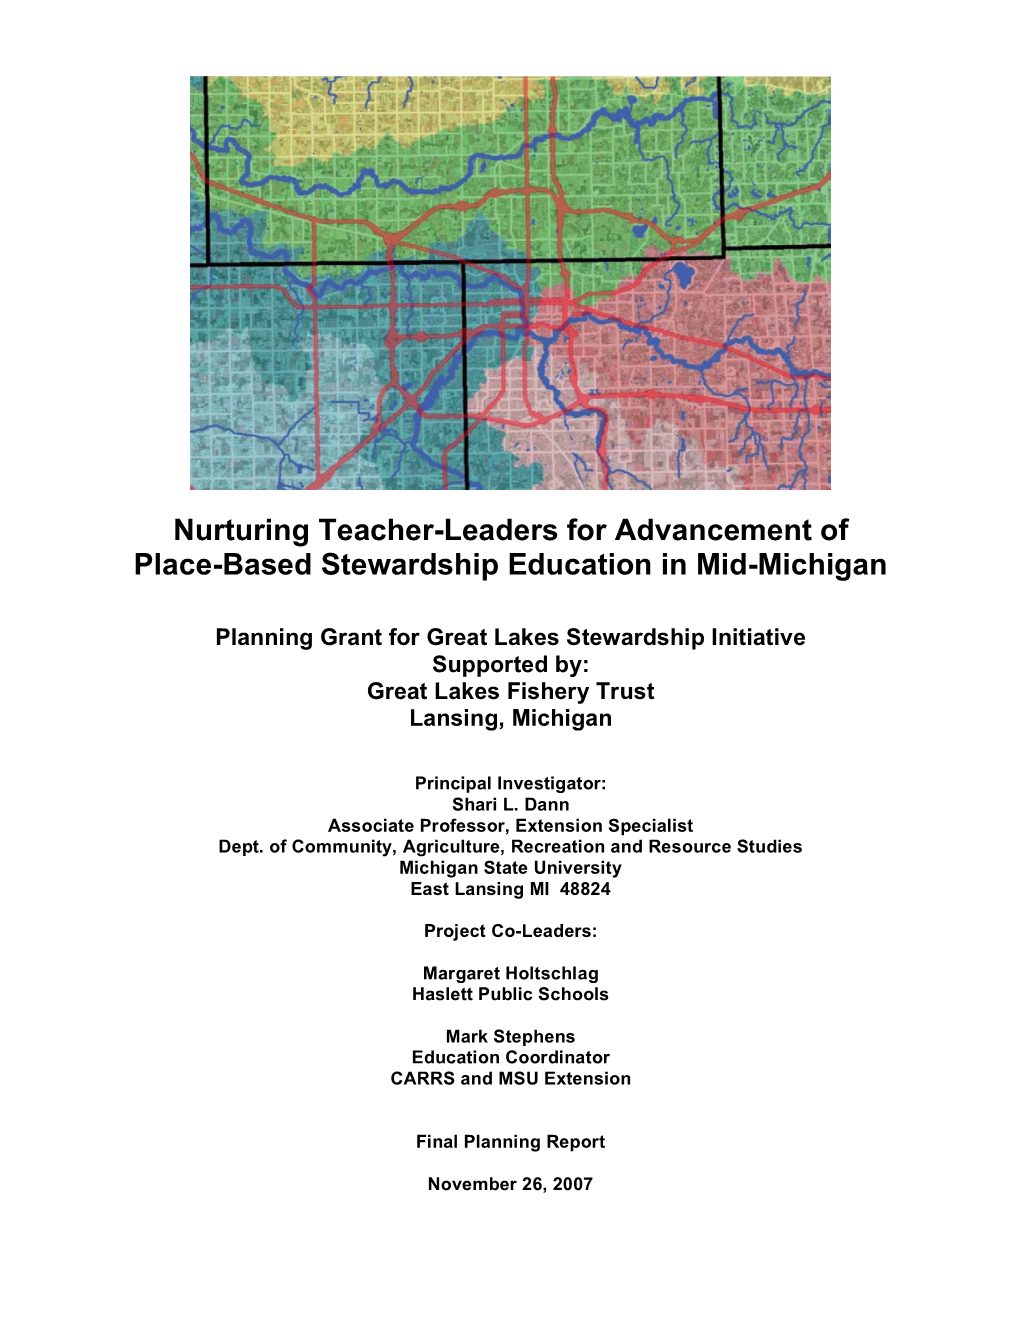 Nurturing Teacher-Leaders for Advancement of Place-Based Stewardship Education in Mid-Michigan